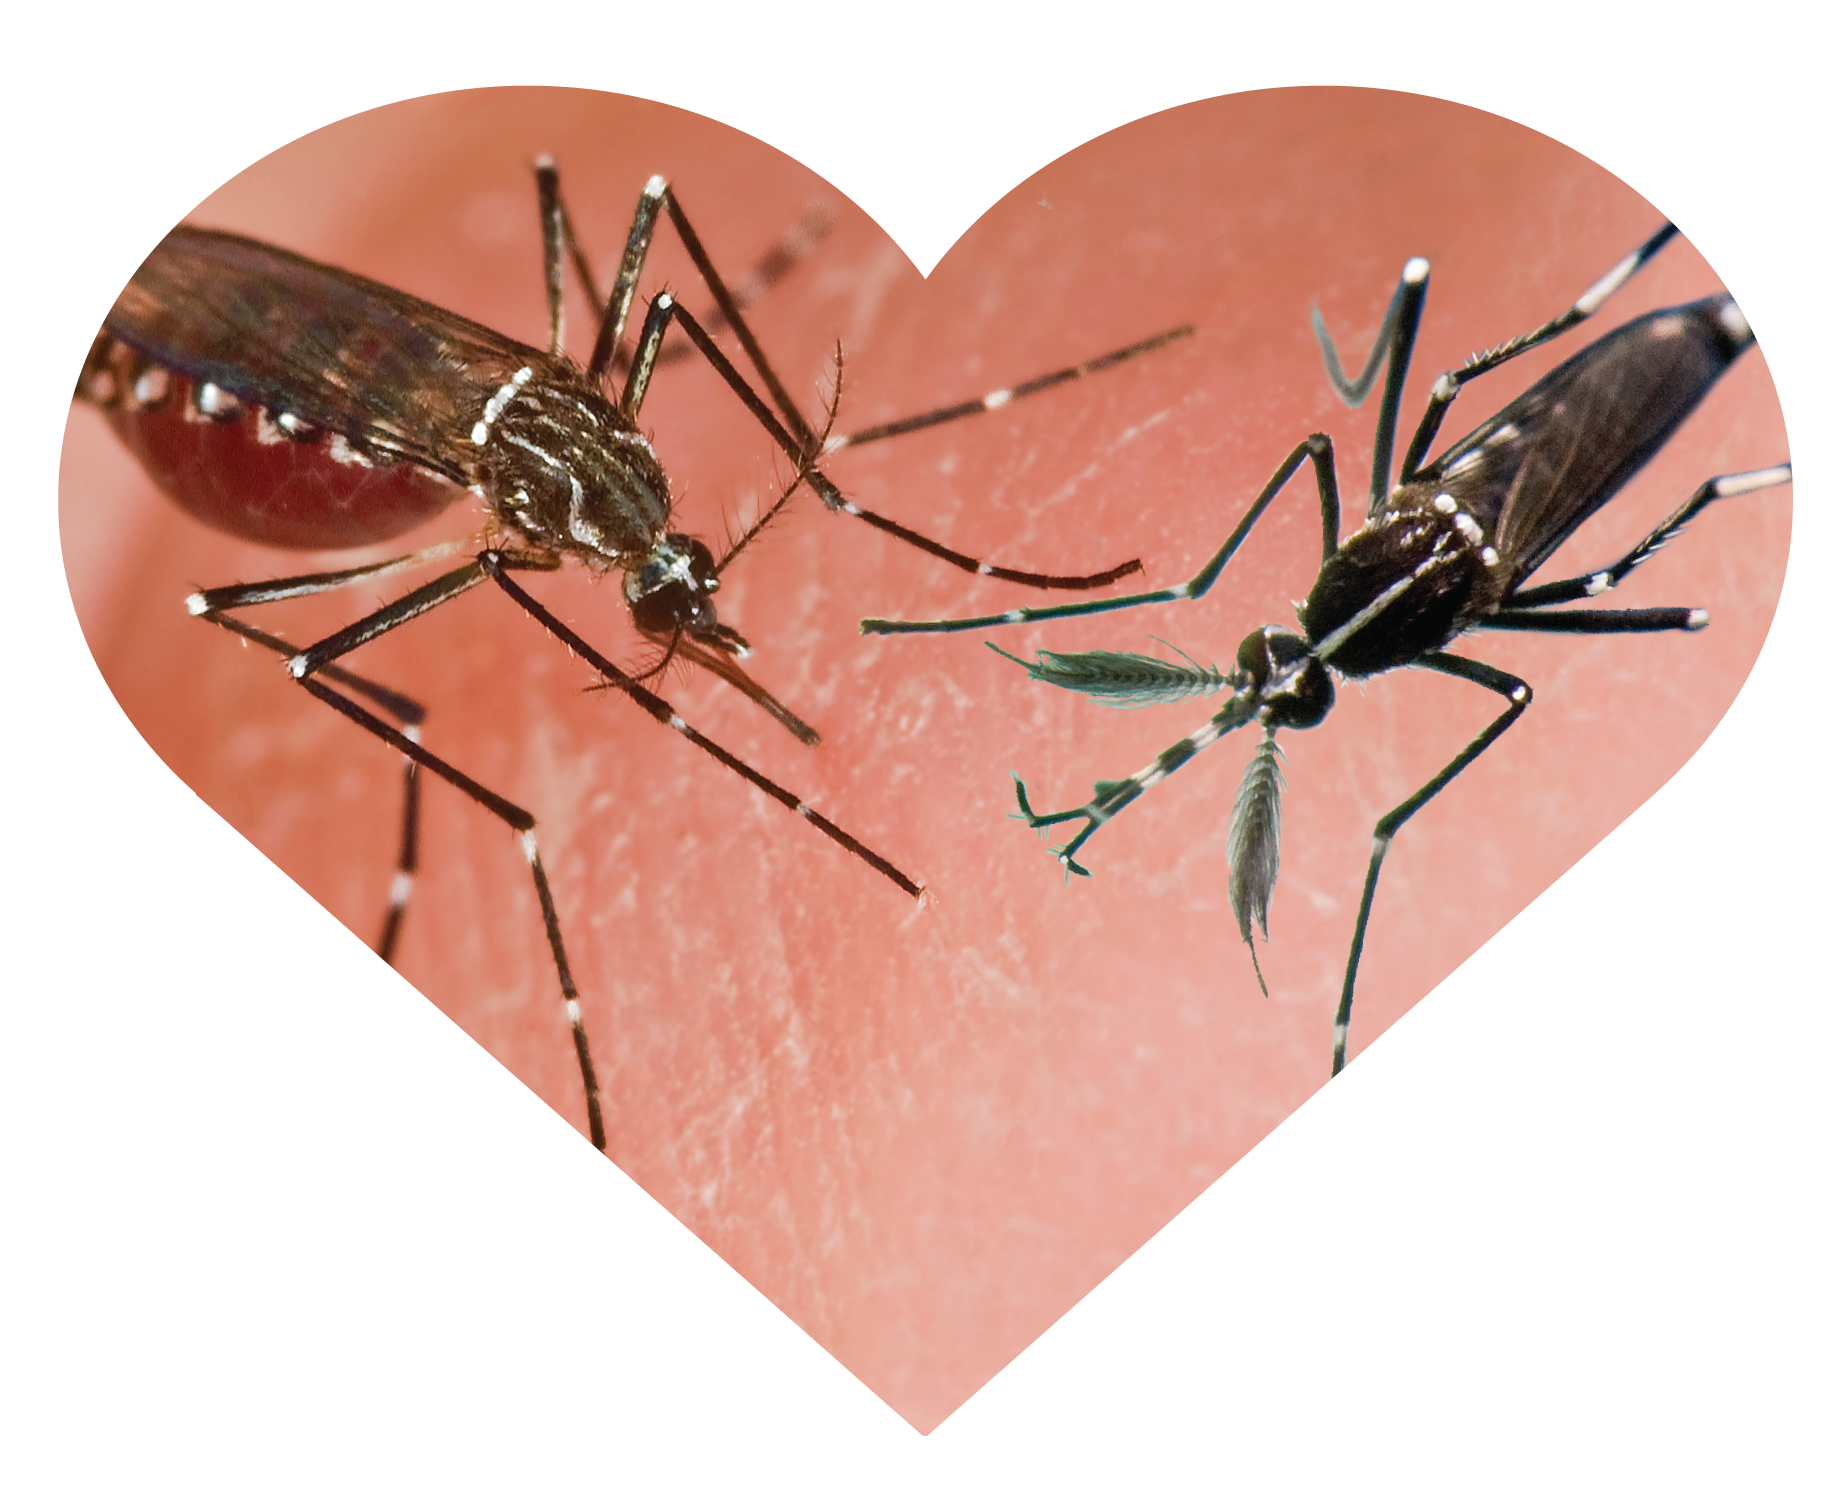 This composite image shows a female (left) and male (right) Asian tiger mosquito (Aedes albopictus). Male Ae. albopictus will attempt to mate with females of another mosquito species with overlapping habitat, the yellow fever mosquito (Aedes aegypti). Cross species matings may sterilize the Ae. aegypti females for life and contribute to rapid competitive displacements of A. aegypti, as observed in the areas of the southeast United States associated with tiger mosquito invasions. Photos and graphics by J. Newman, Florida Medical Entomology Laboratory, University of Florida.